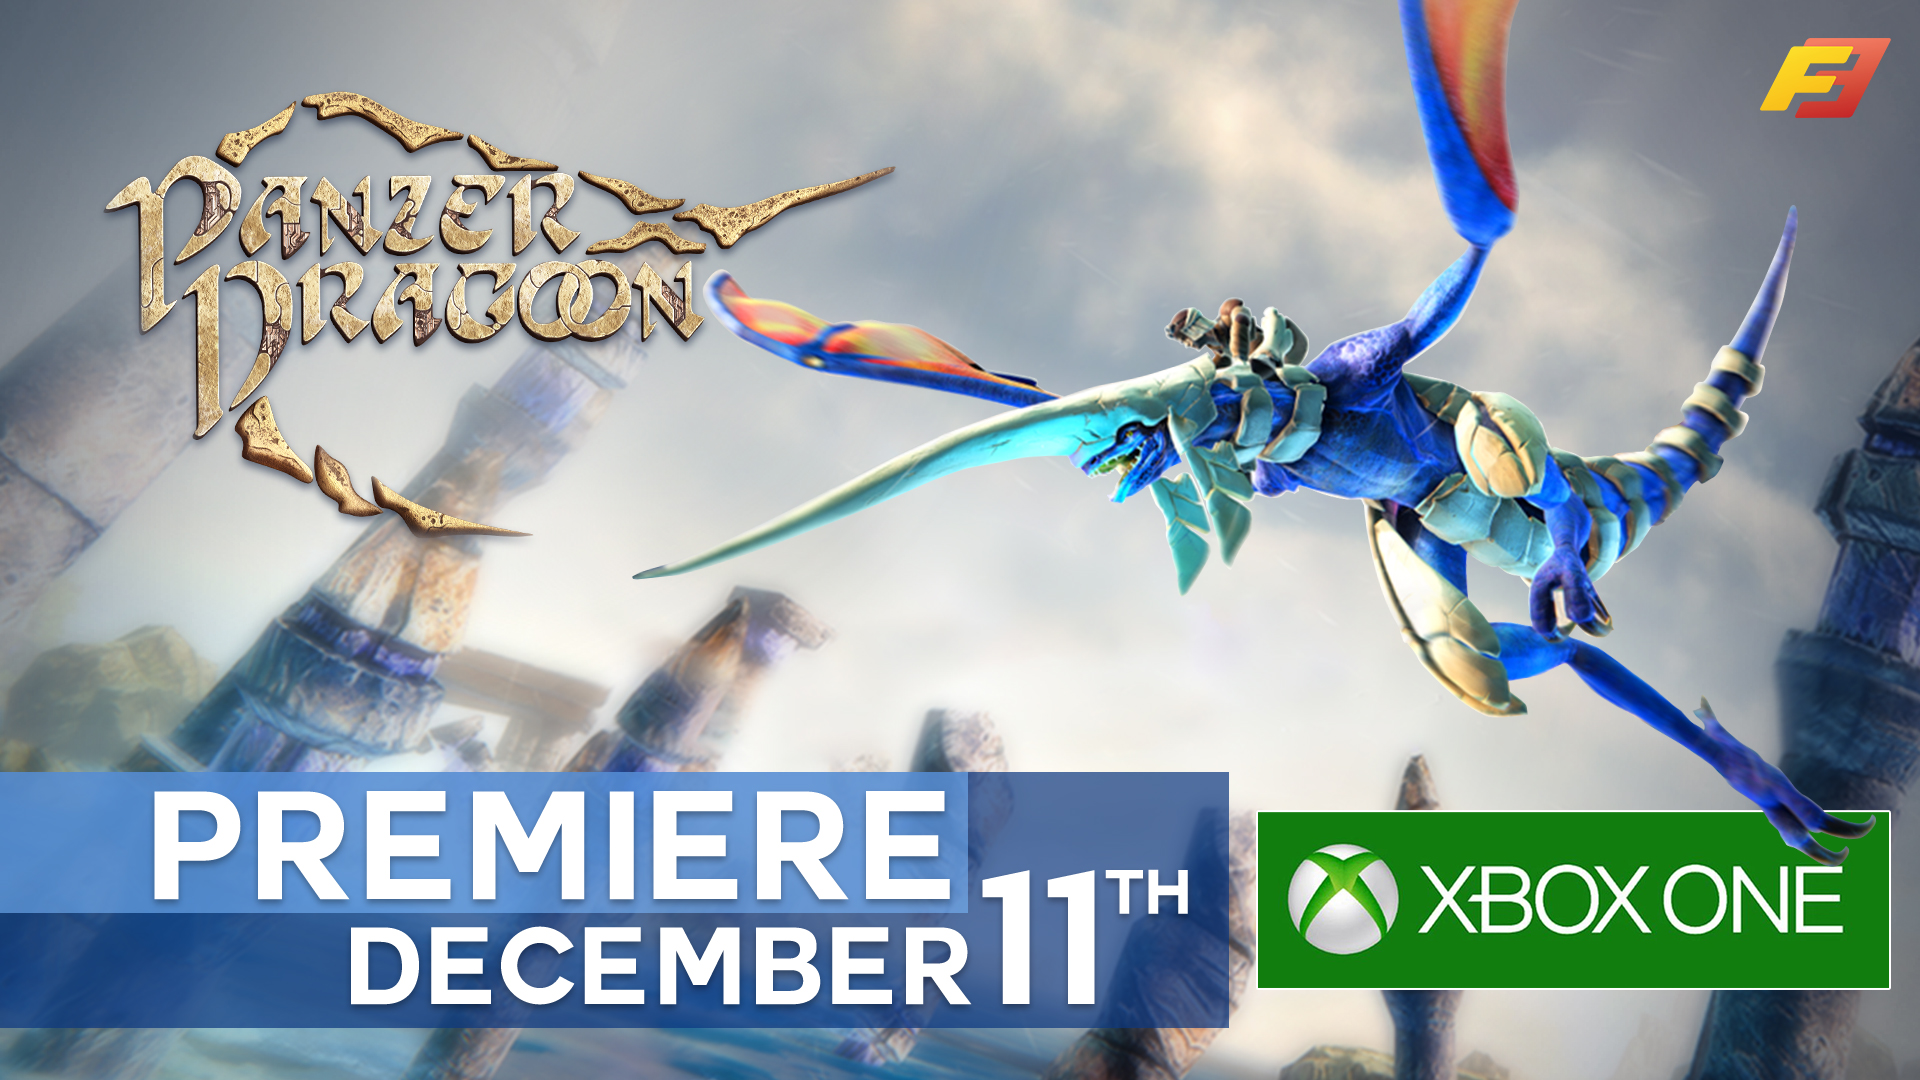 Panzer Dragoon: Remake coming to Xbox on December 11